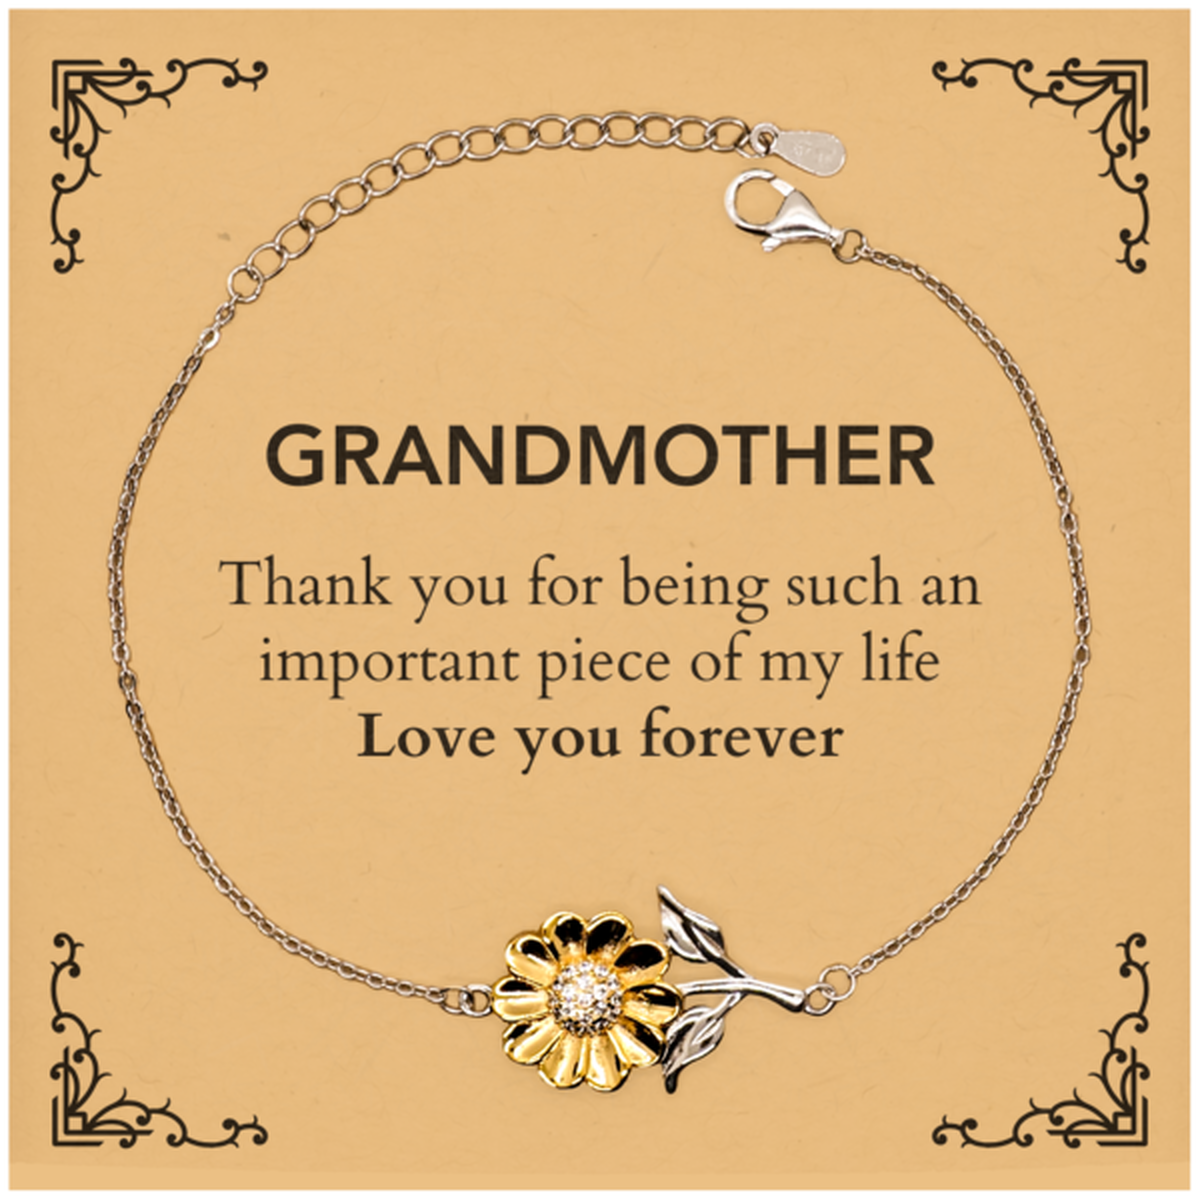 Appropriate Grandmother Sunflower Bracelet Epic Birthday Gifts for Grandmother Thank you for being such an important piece of my life Grandmother Christmas Mothers Fathers Day